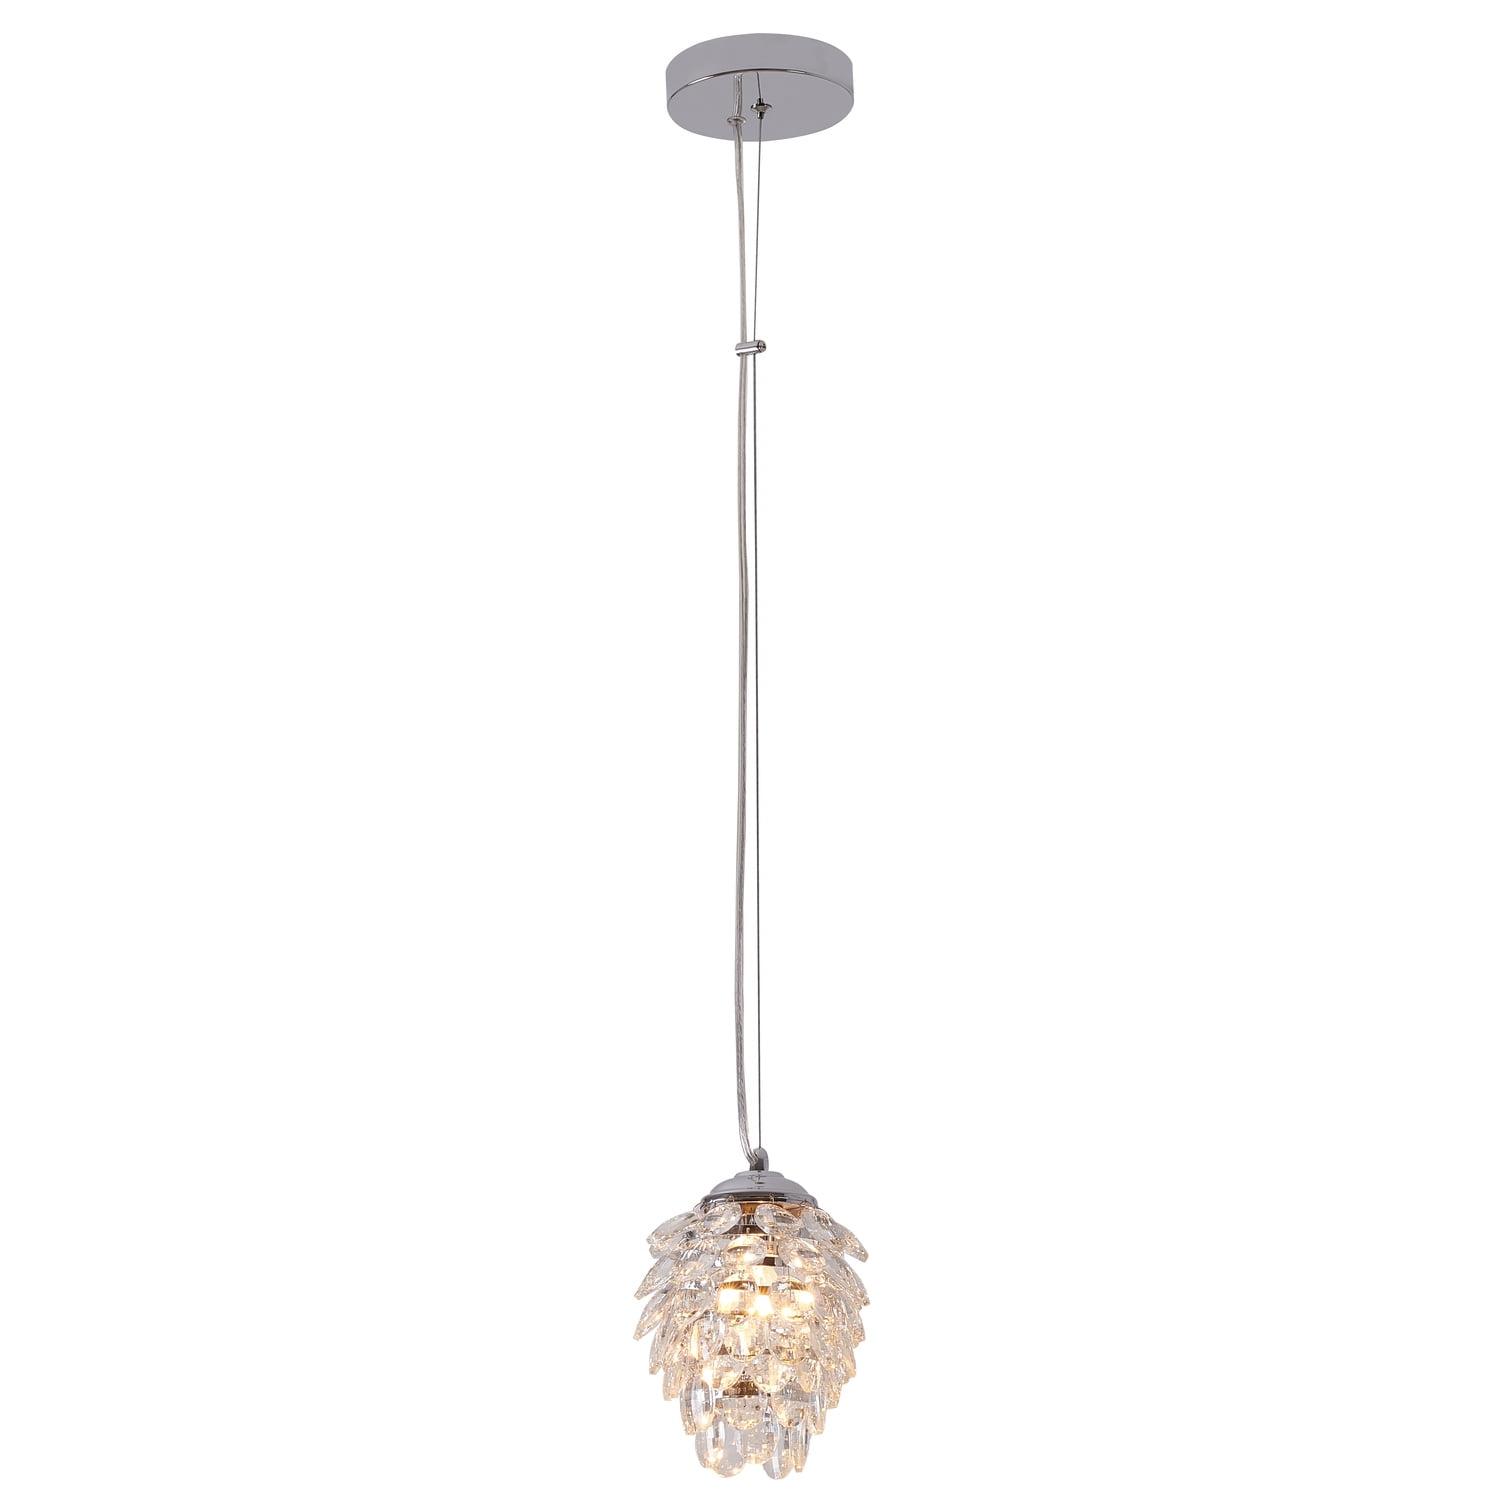 Pineapple-Shaped Crystal Pendant Light with Chrome Finish